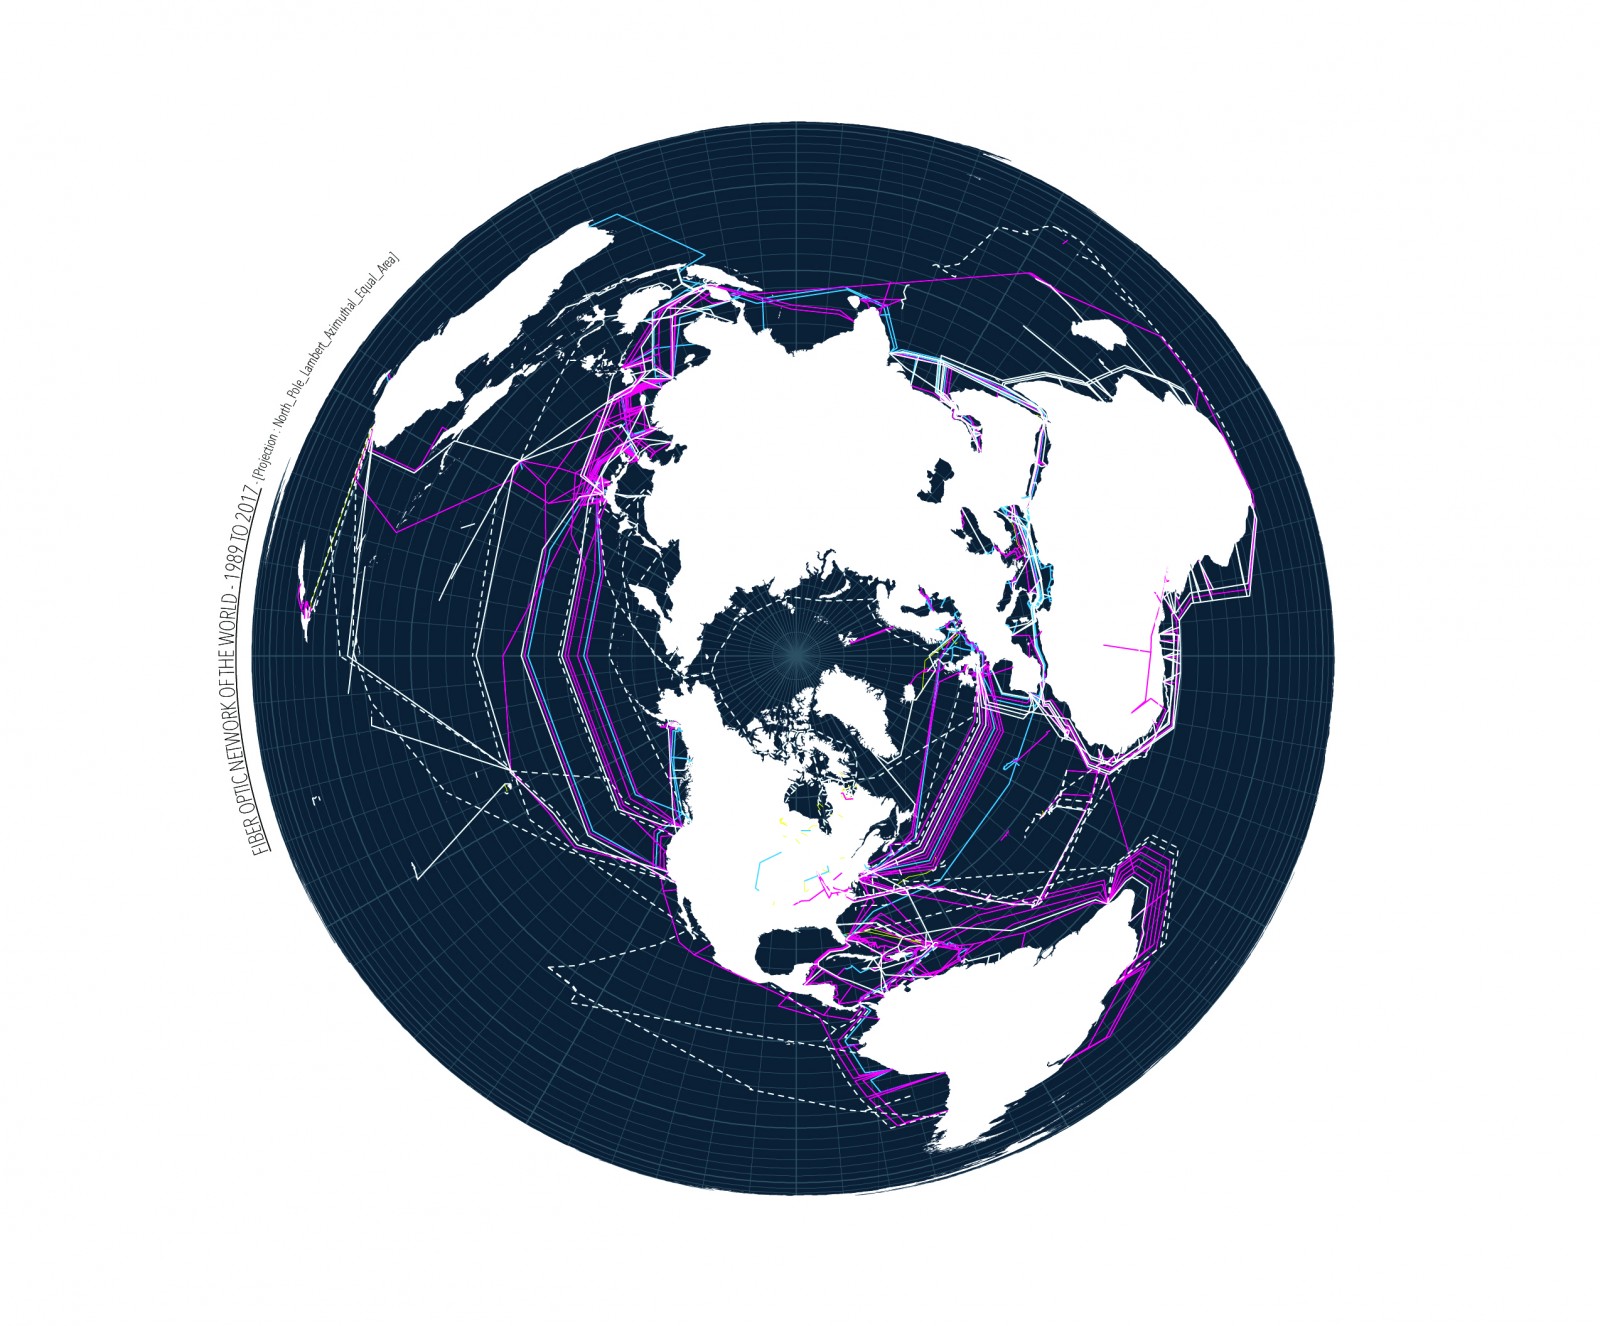 Cable_Map_PolarProjection [Converted]_LTR-01